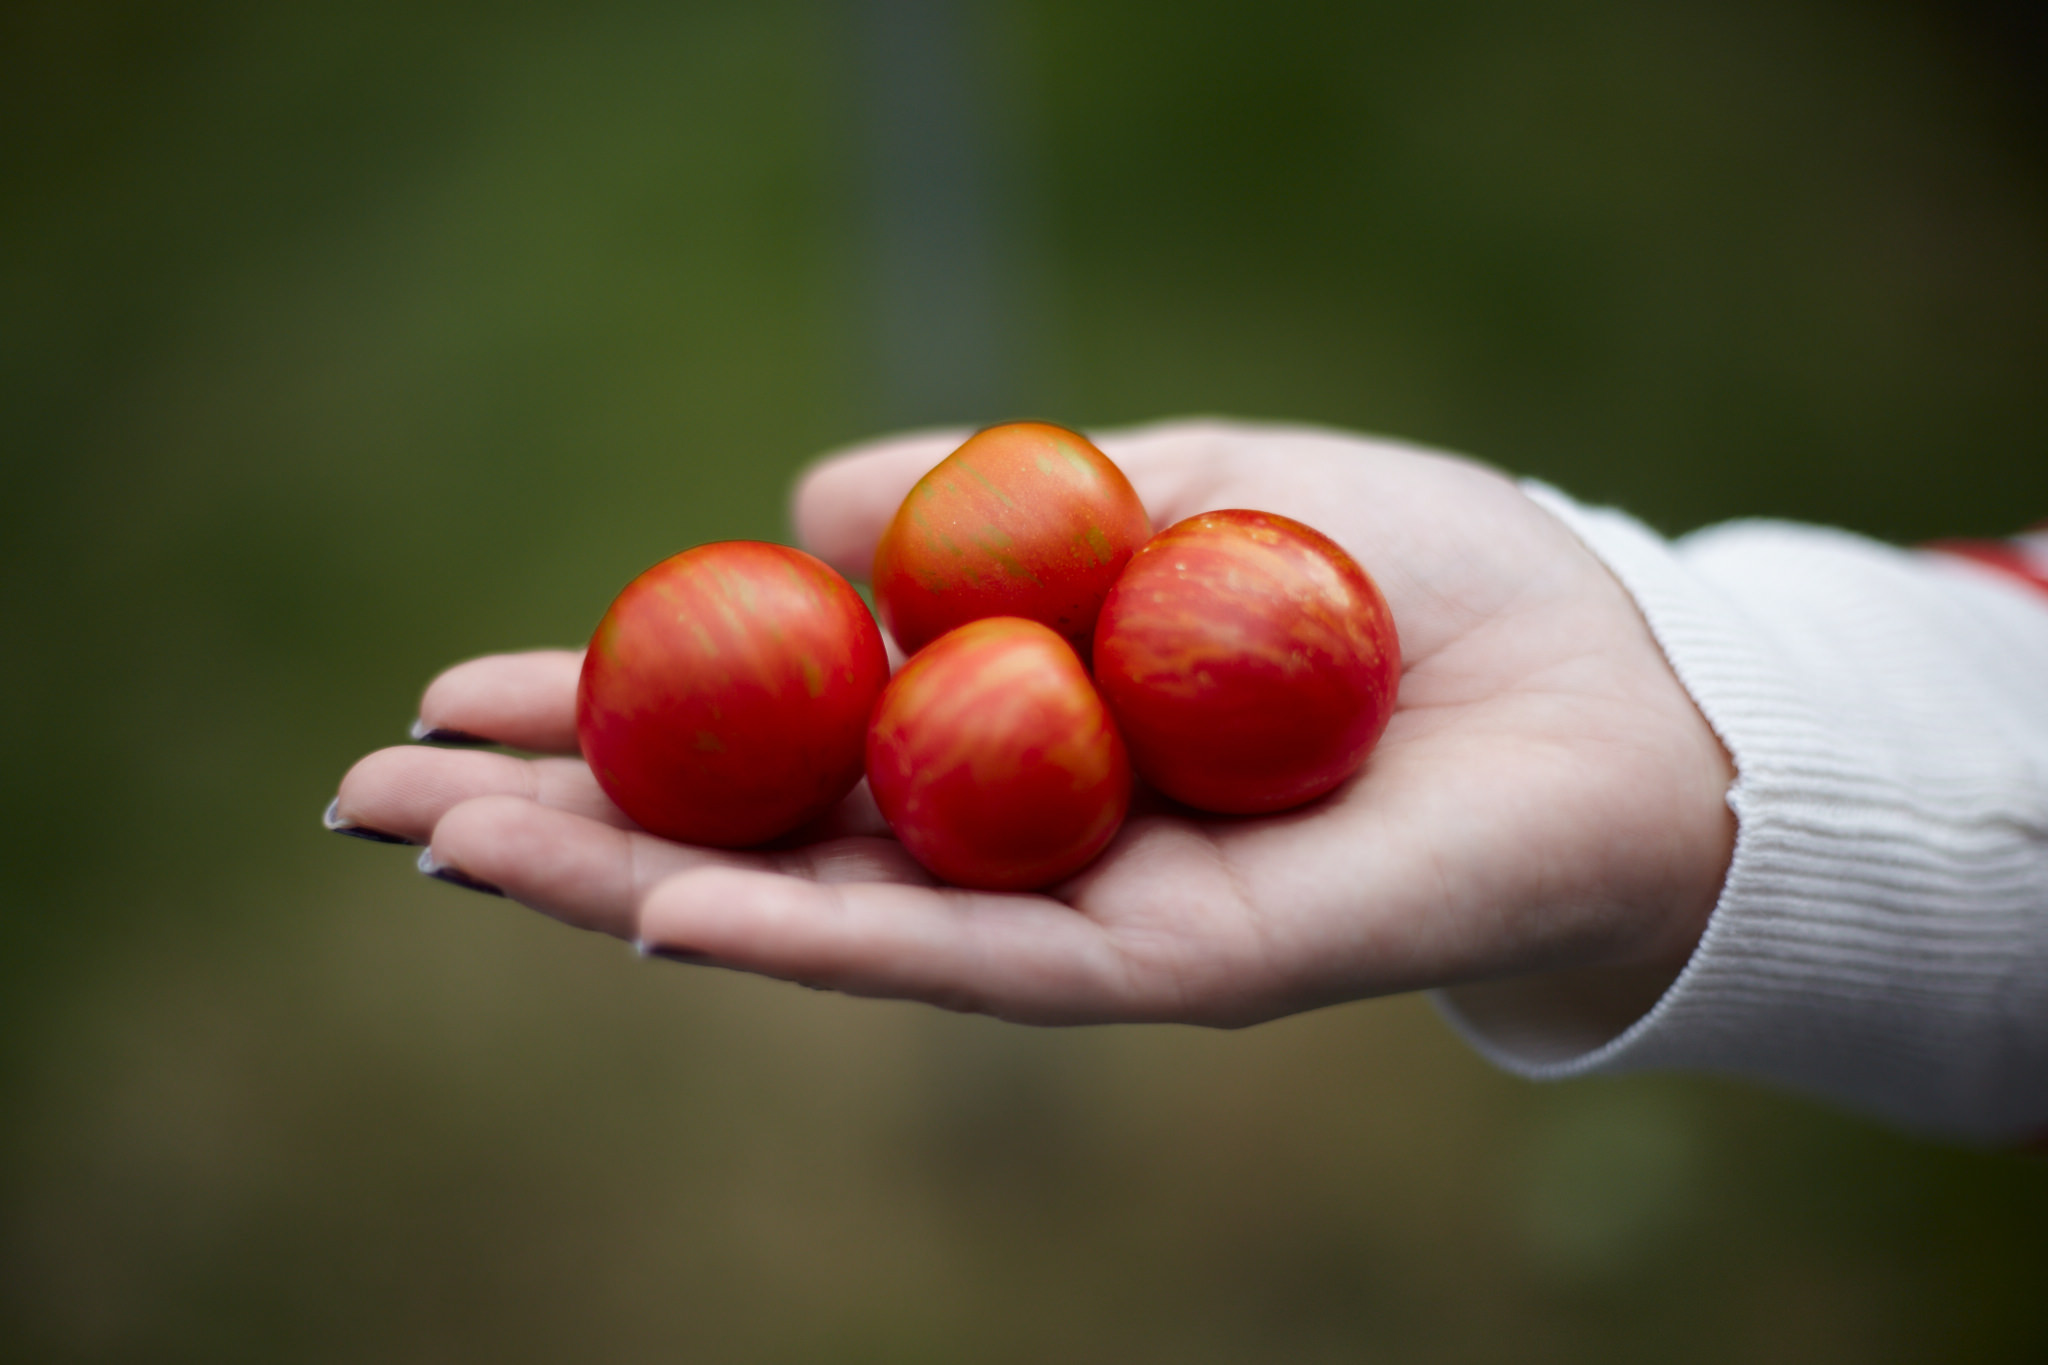 A hand holding some bright red tomatoes